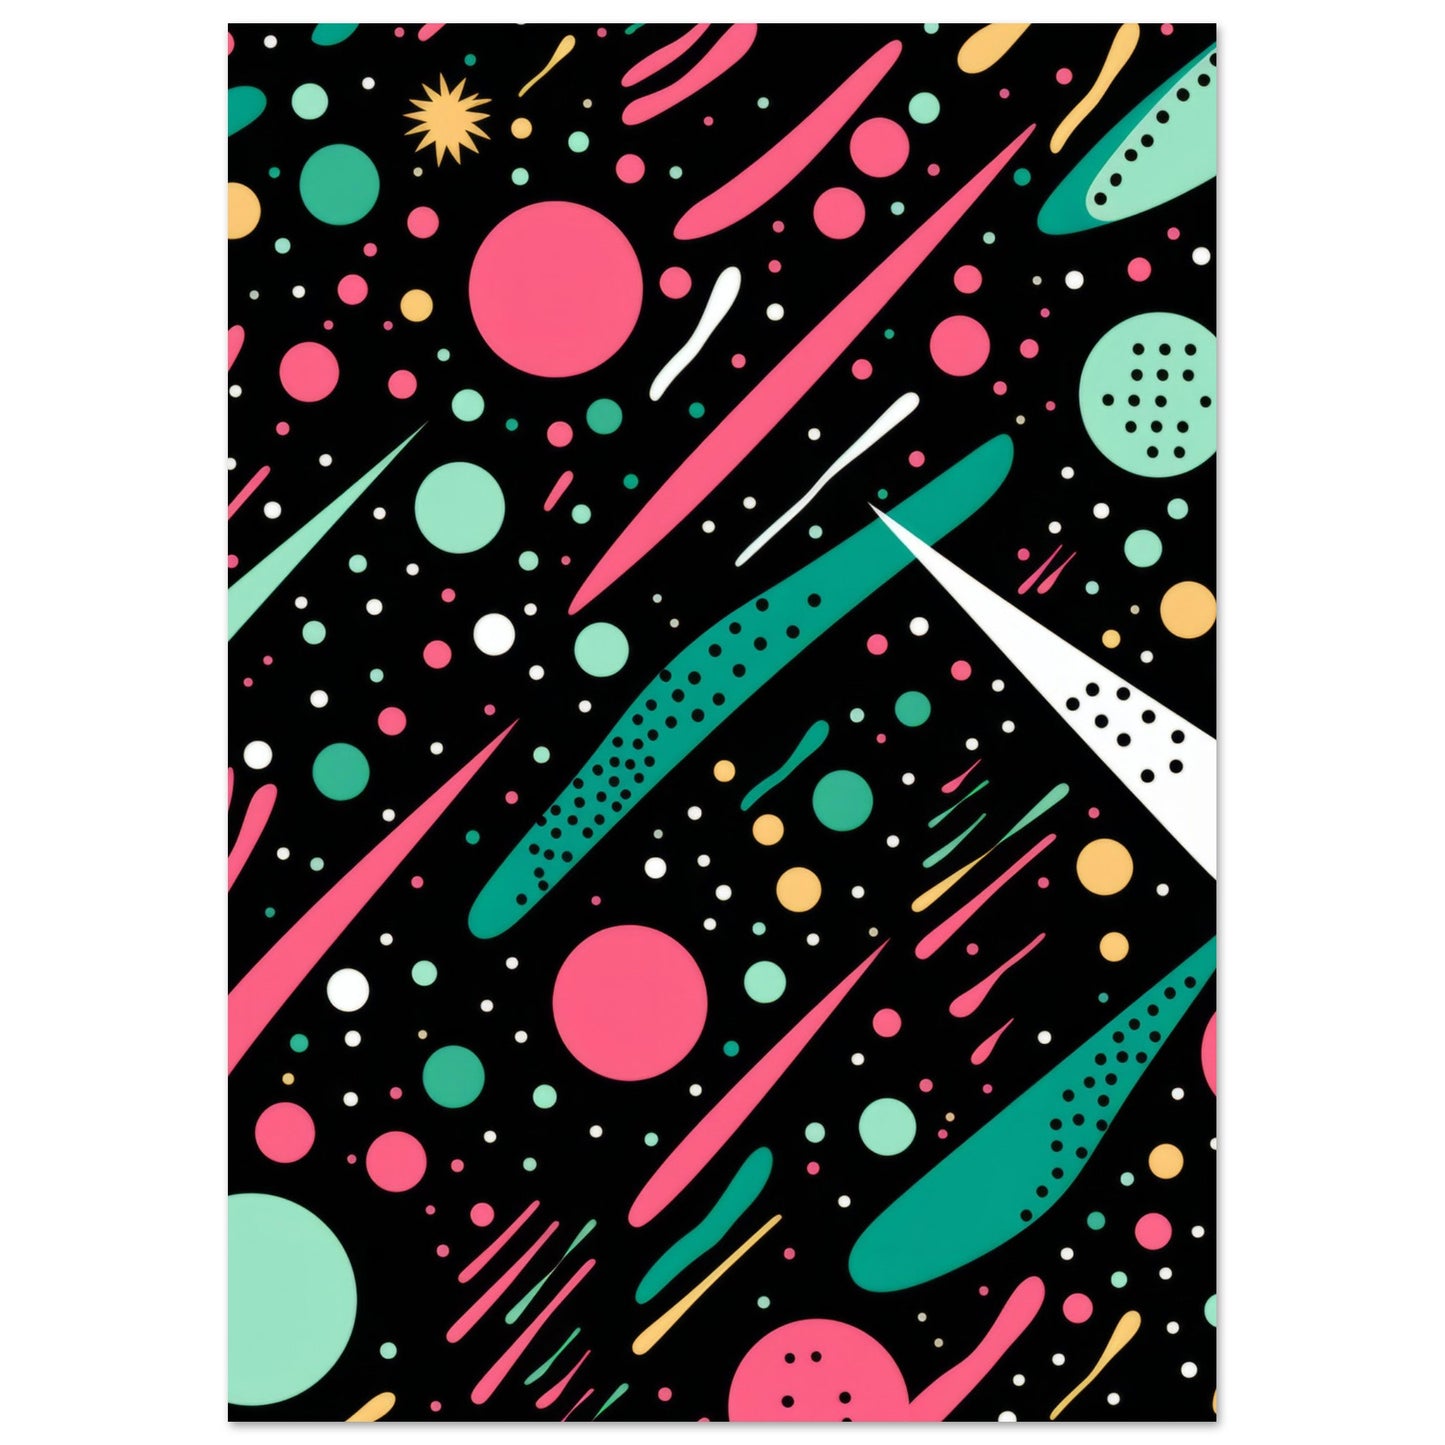 A modern art print titled "Happy Debris," featuring an energetic ensemble of colorful dots, lines, and shapes set against a deep black background. The vibrant hues of pink and green, combined with the abstract design, evoke a sense of joyful space debris, creating a stunning piece of contemporary wall decor.